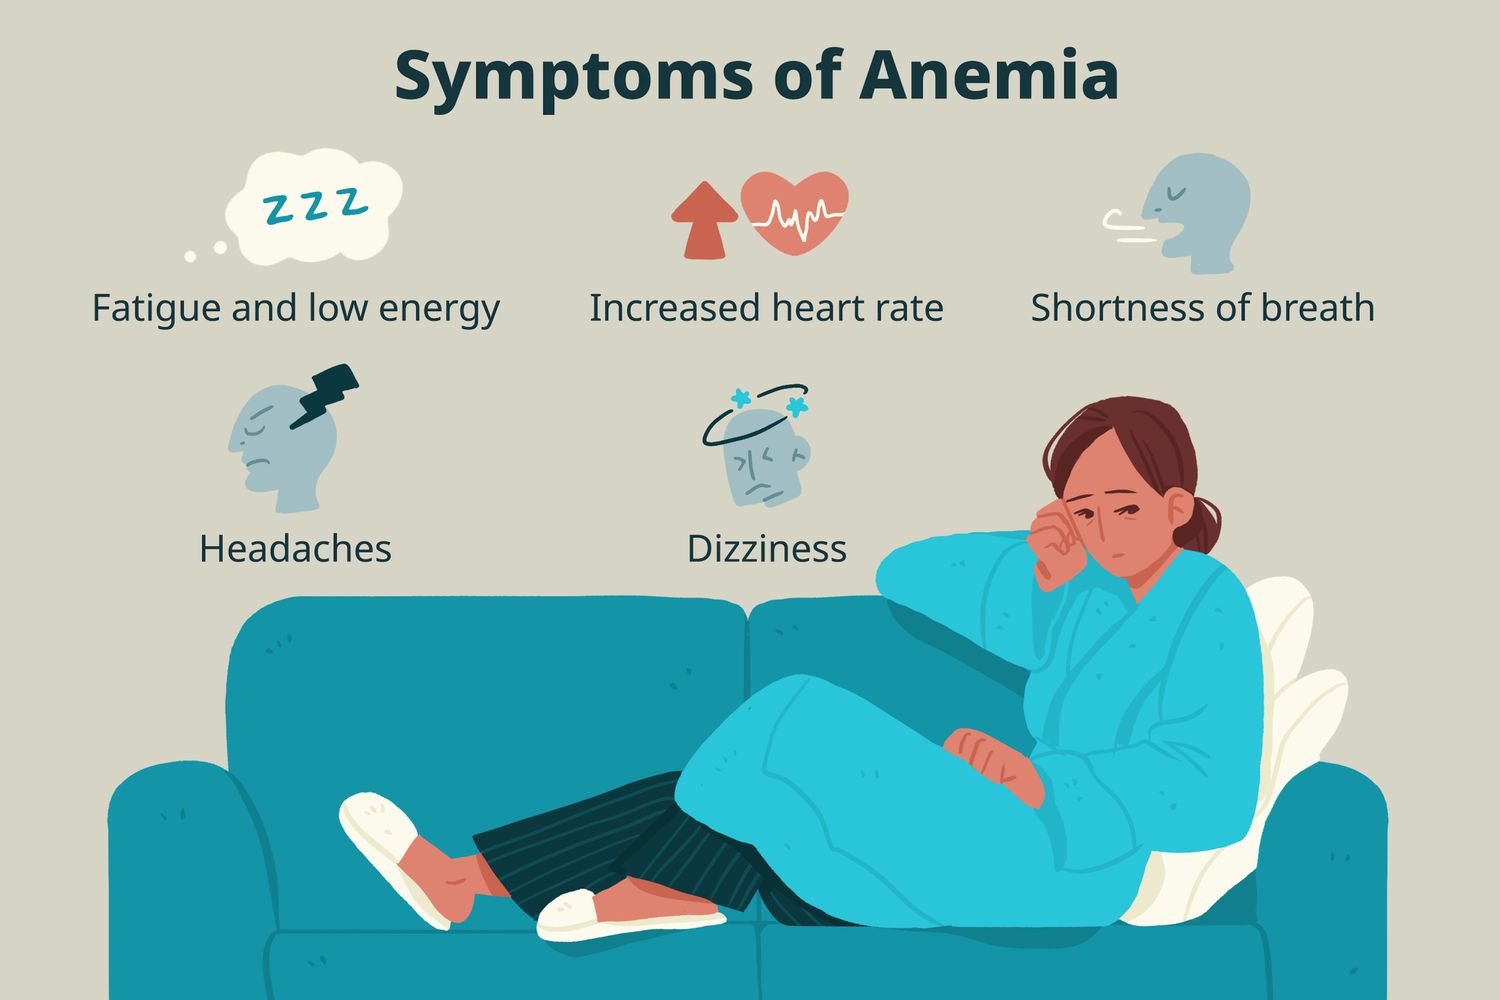 7 immediate measures to prevent anemia: Take action now!”